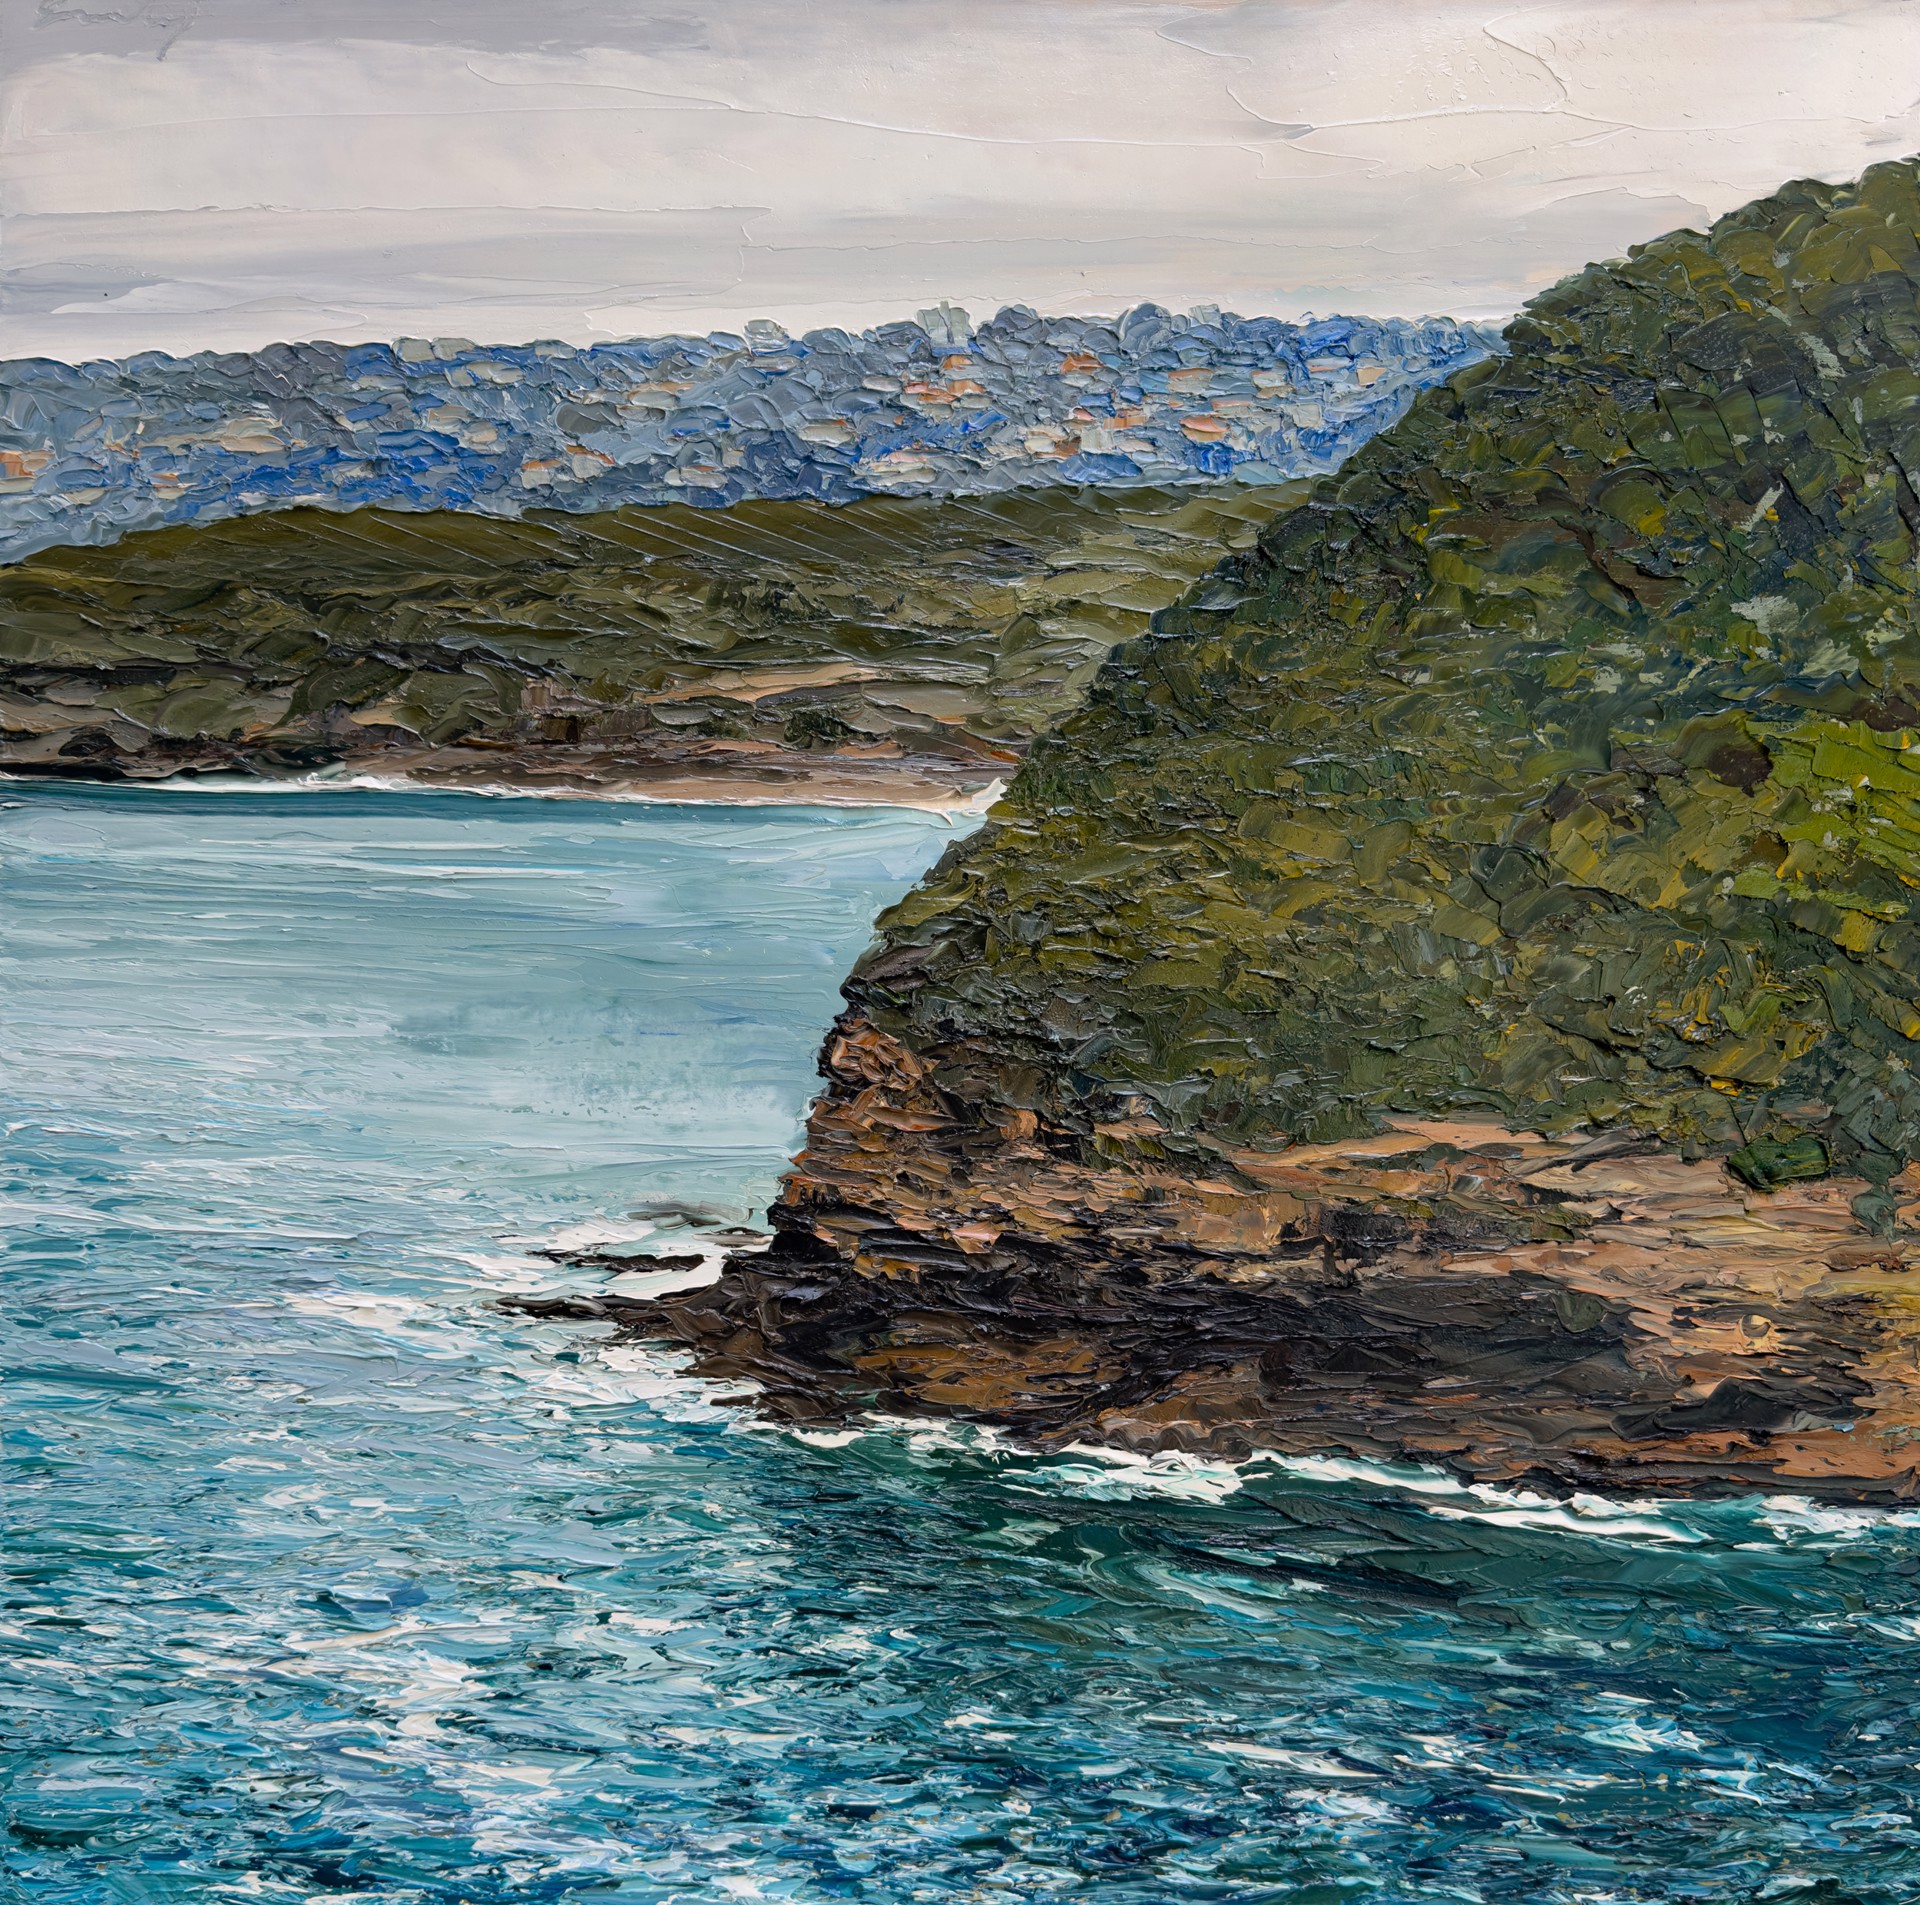 Sydney Headland With Sapphire Water by Emily Persson